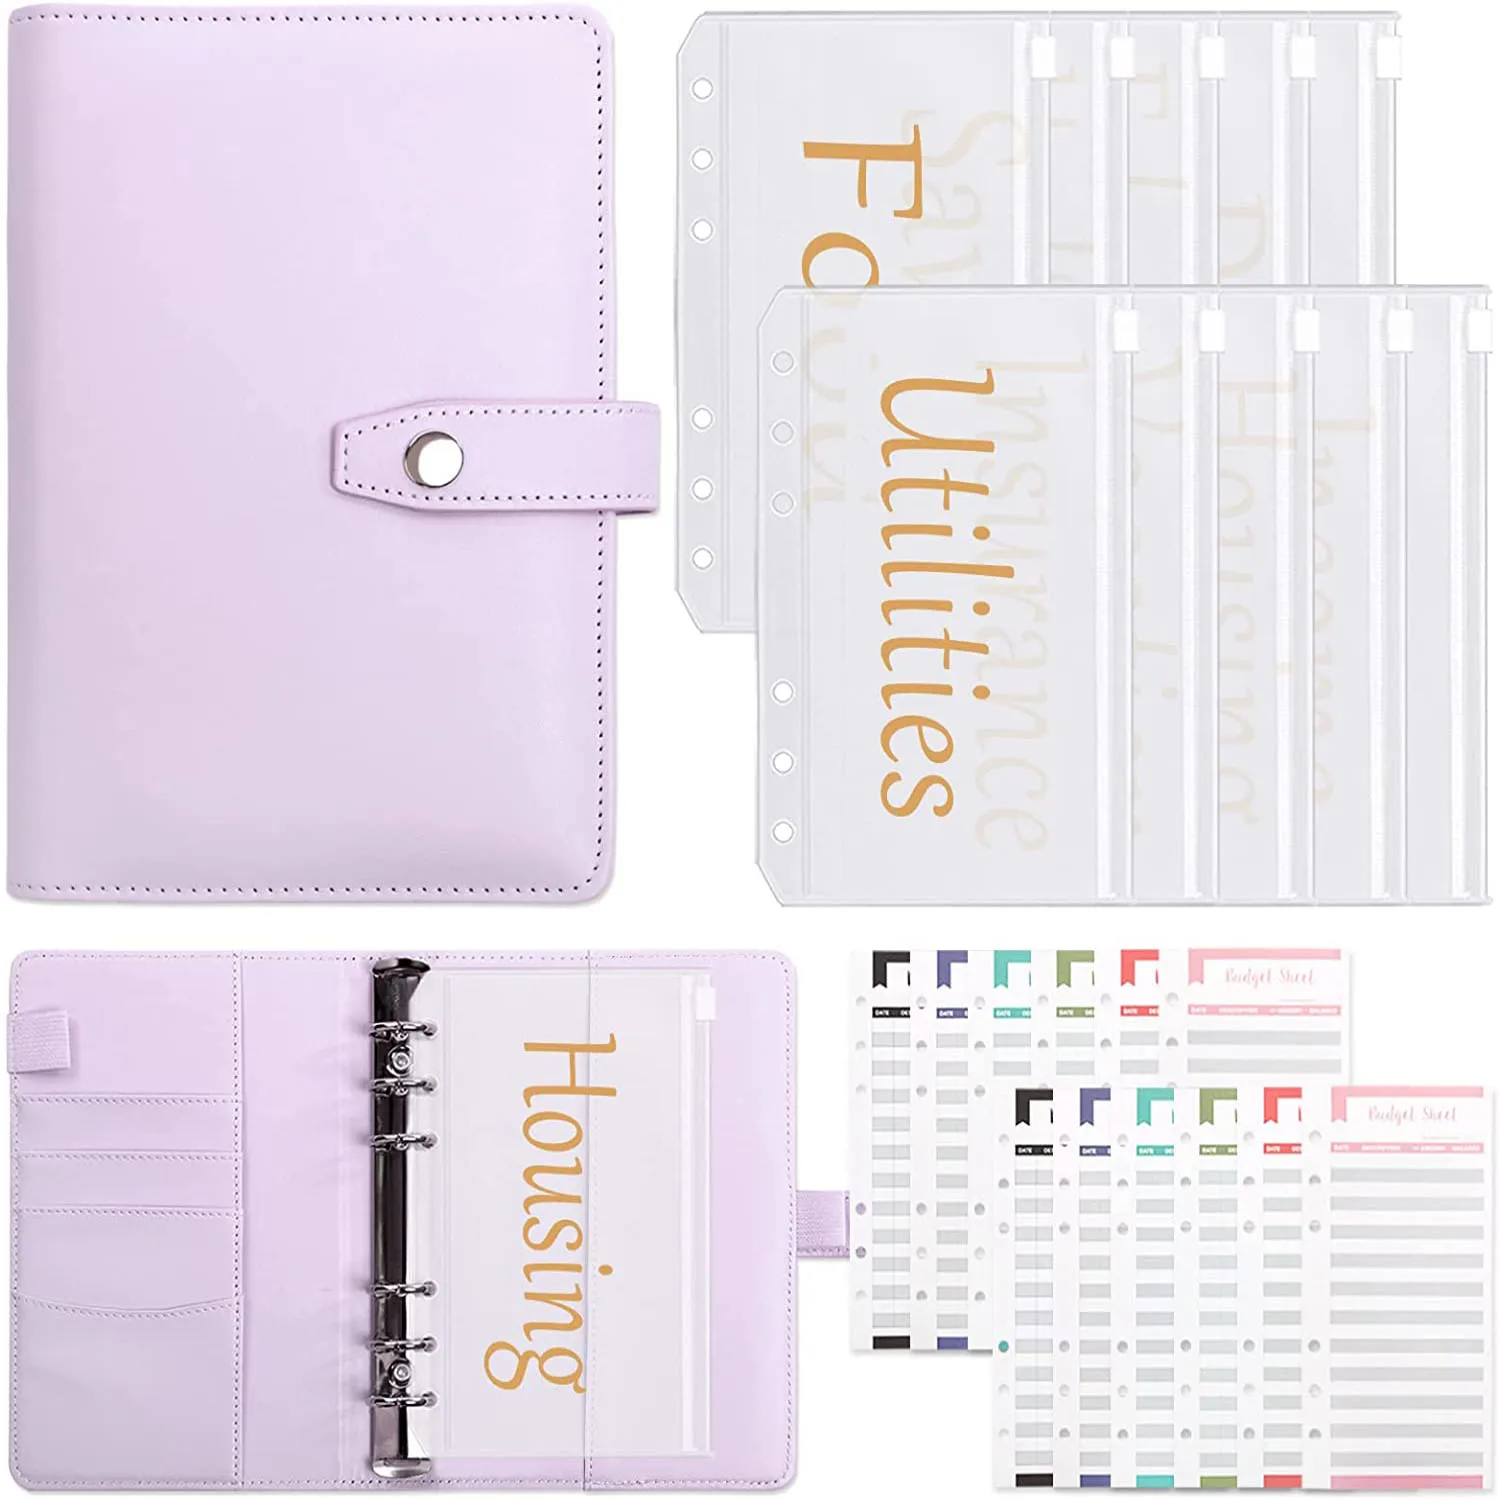 A6 Budget Binder with 10pcs Pre-printed Cash Envelopes for Budgeting,12 Expense Budget Sheets,Planner Organizer for Saving Money a6 budget binder with zipper envelopes notebook cover cash envelopes budget planner organizer for a6 binder notebook journal